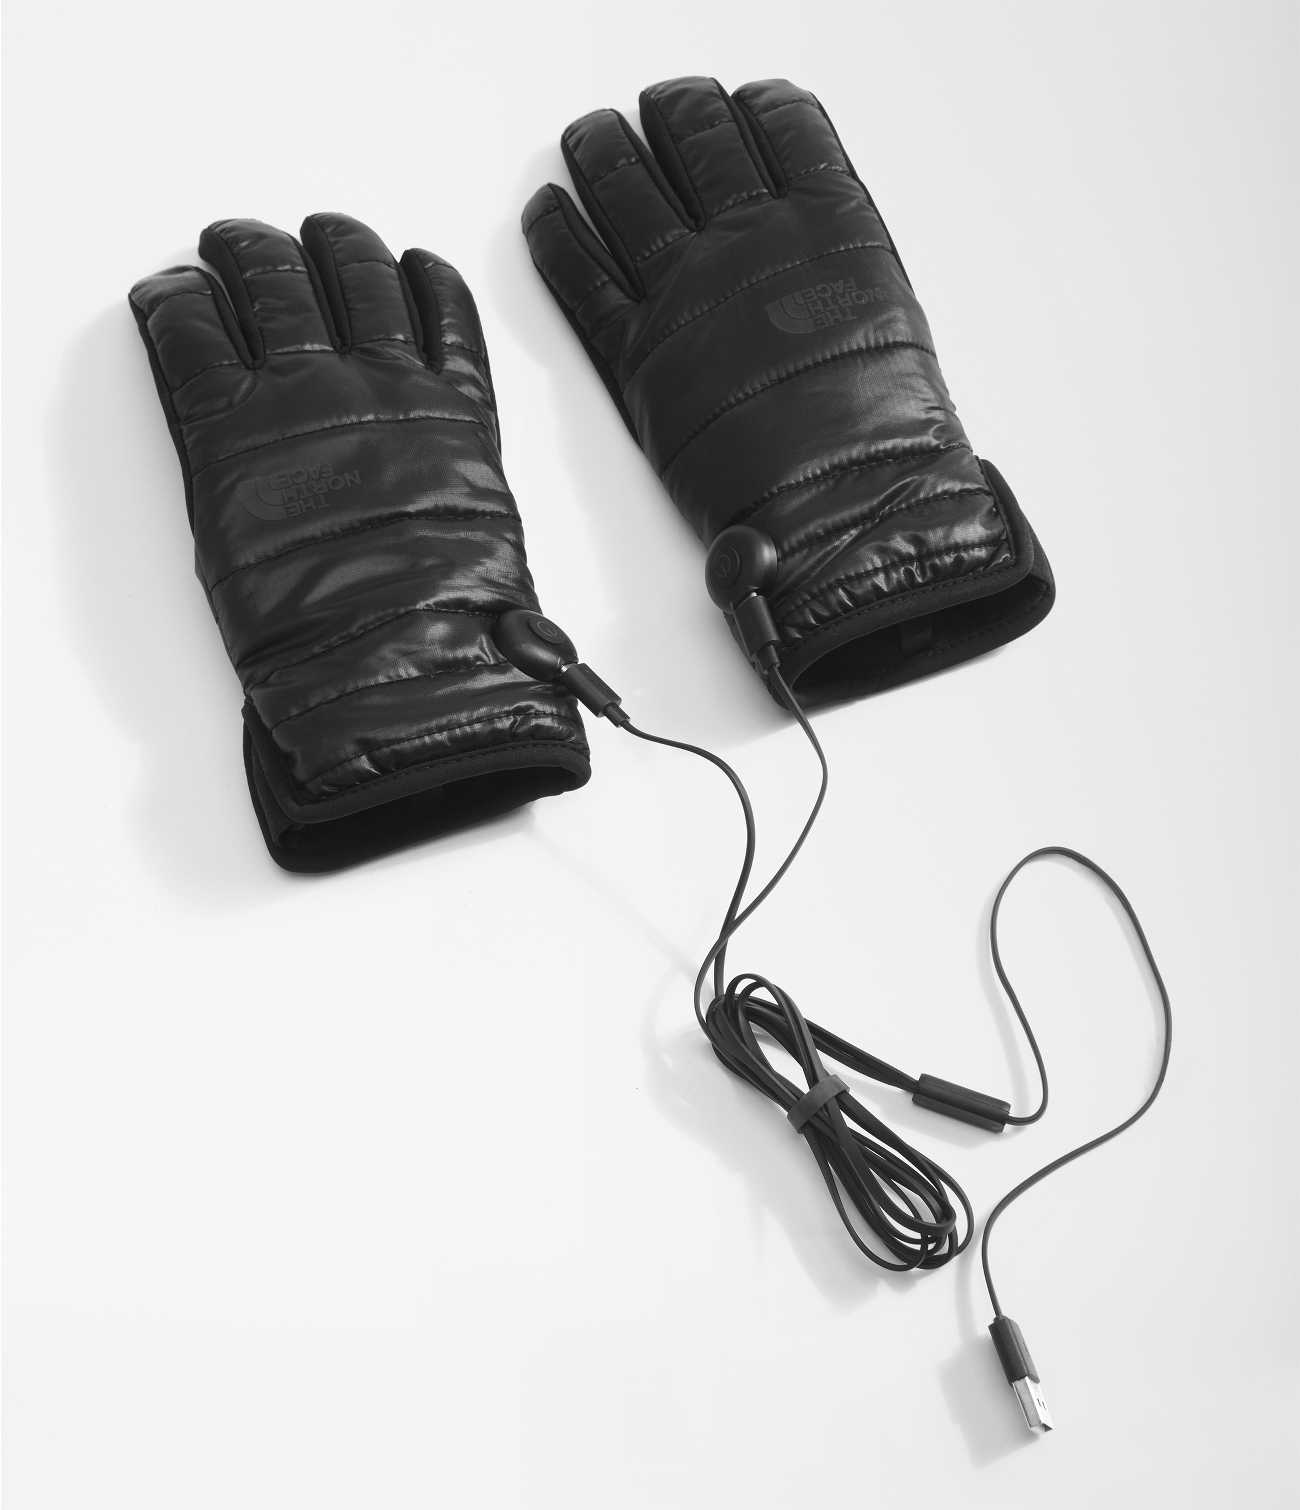 QUILTED HEATED GLOVE | The North Face | The North Face Renewed